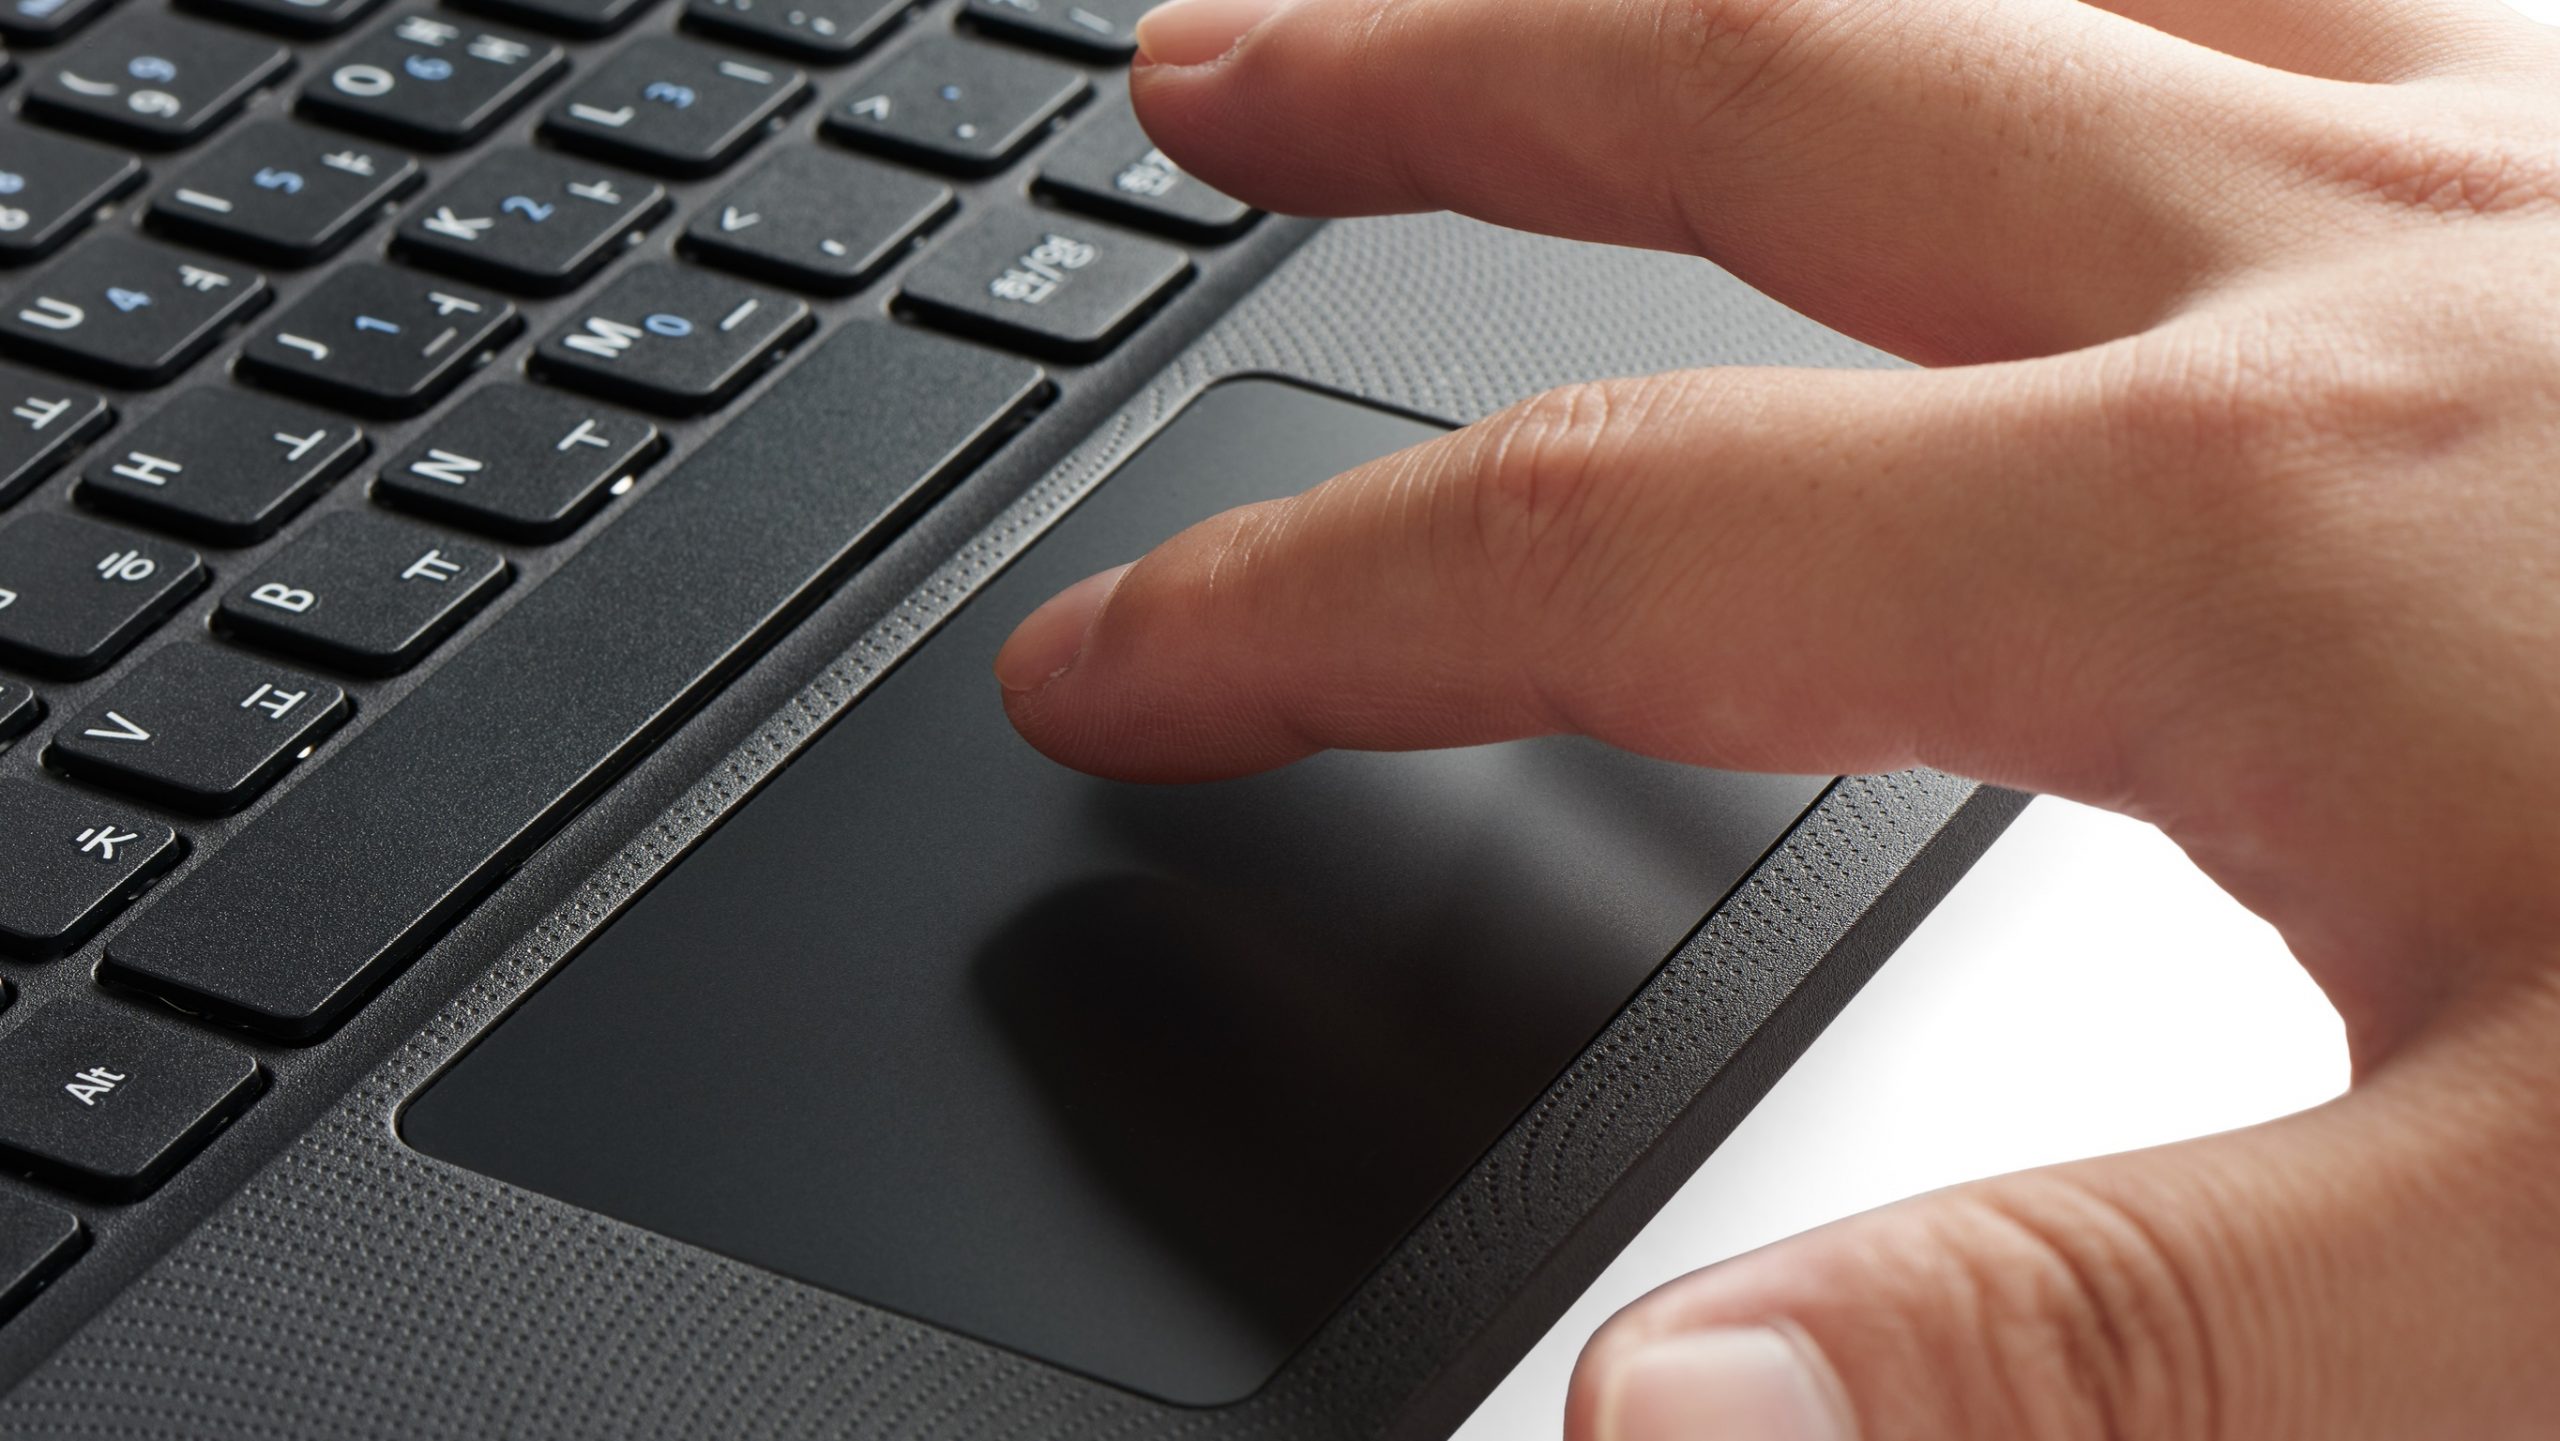 How To Unlock The Touchpad On An HP Laptop